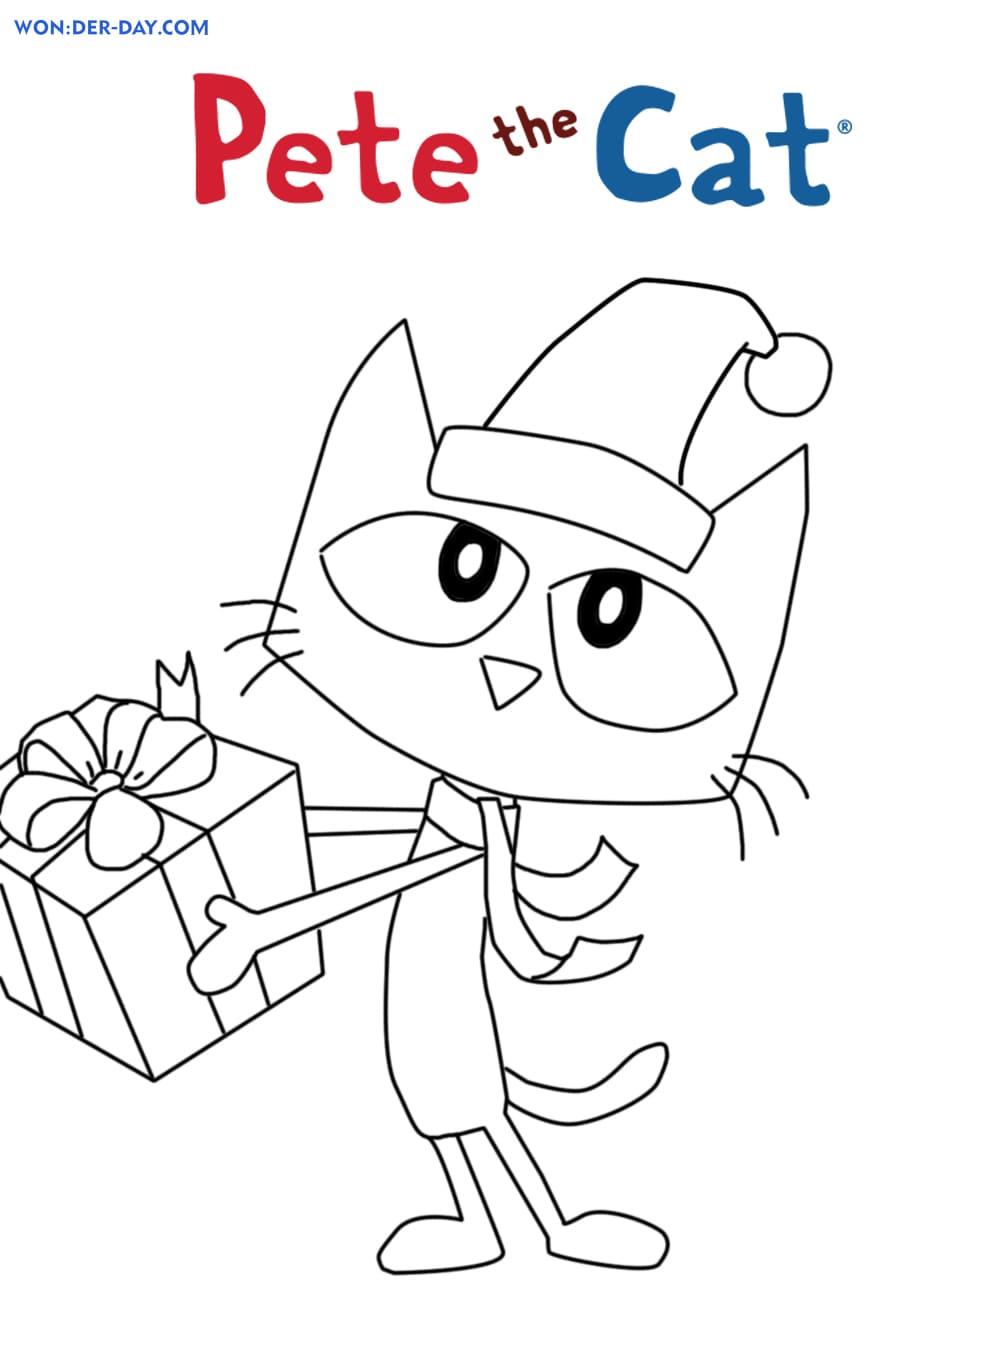 pete-the-cat-coloring-page-free-printable